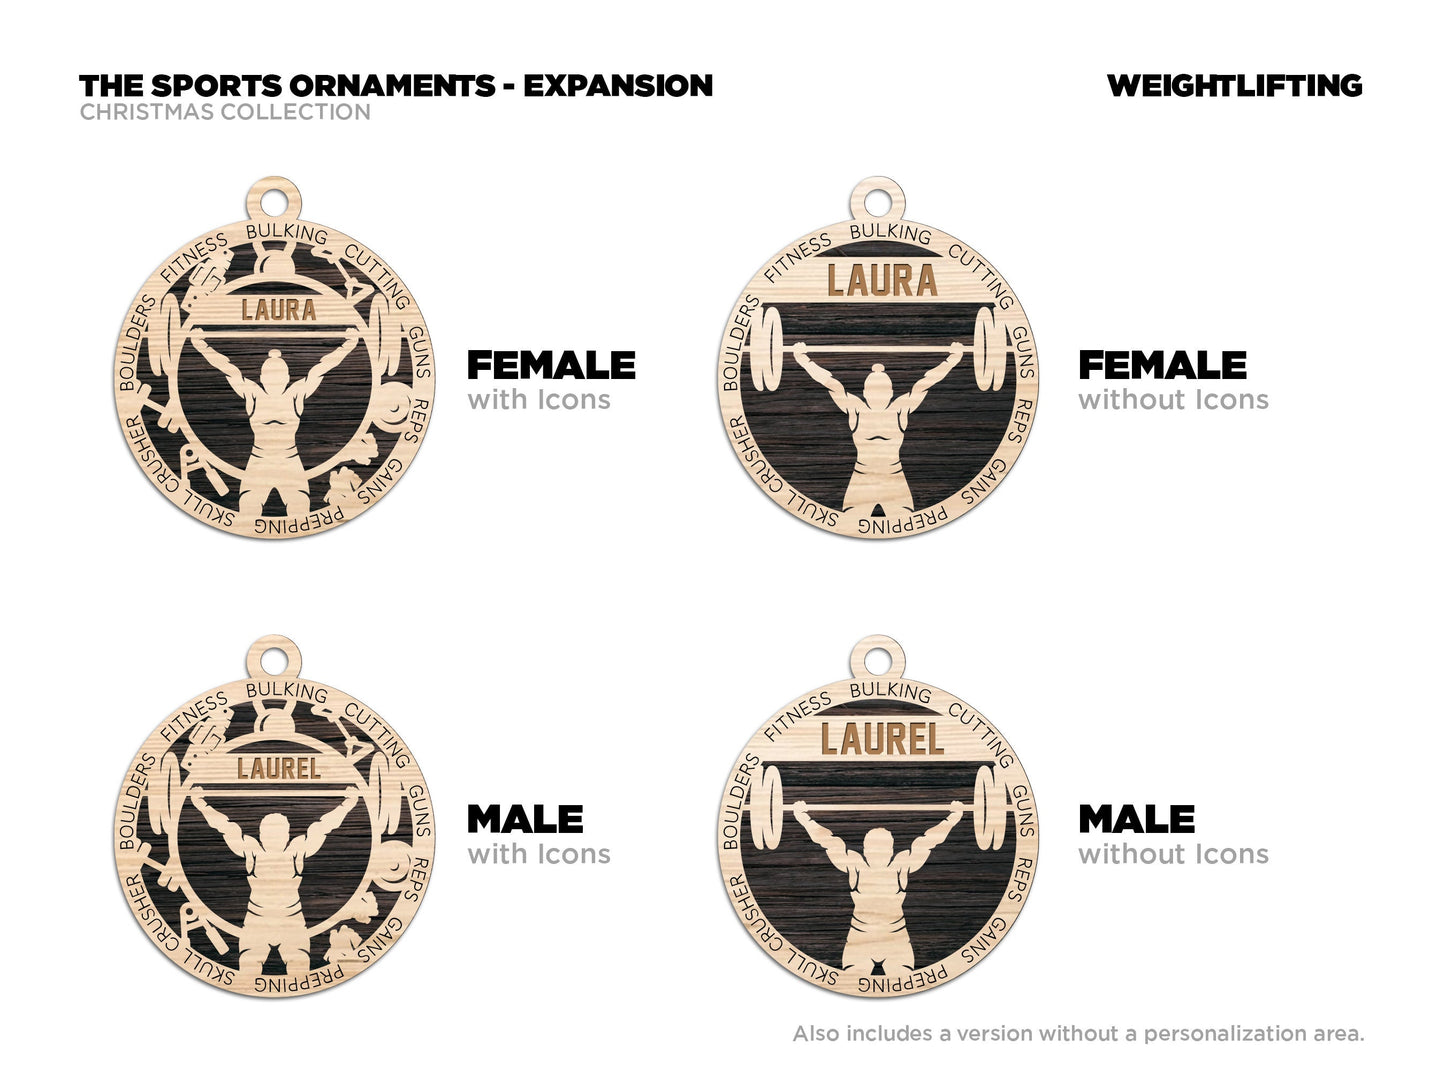 Weight Lifting - Stadium Series Ornaments - 4 Unique designs - SVG, PDF, AI File Download - Sized for Glowforge